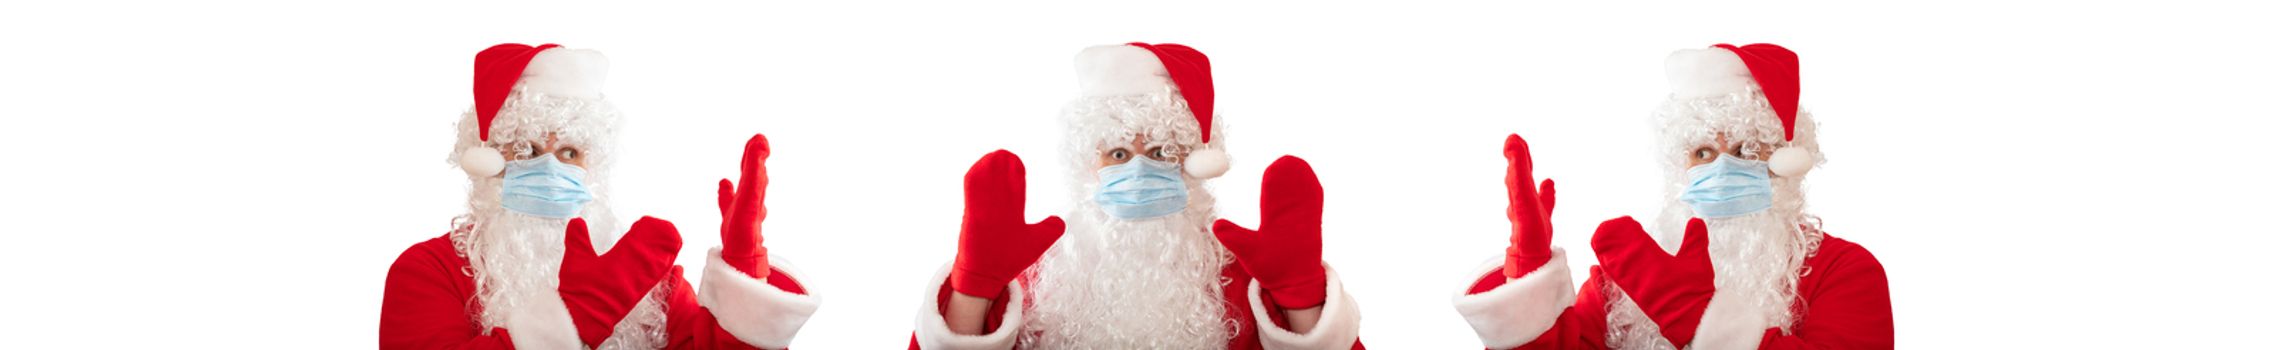 Santa Claus wearing a medical mask, having his both hands up, eyes wide open in warning gesture. Two other Santa Clauses pointing at him. Isolated on white background. Banner size, copy space.